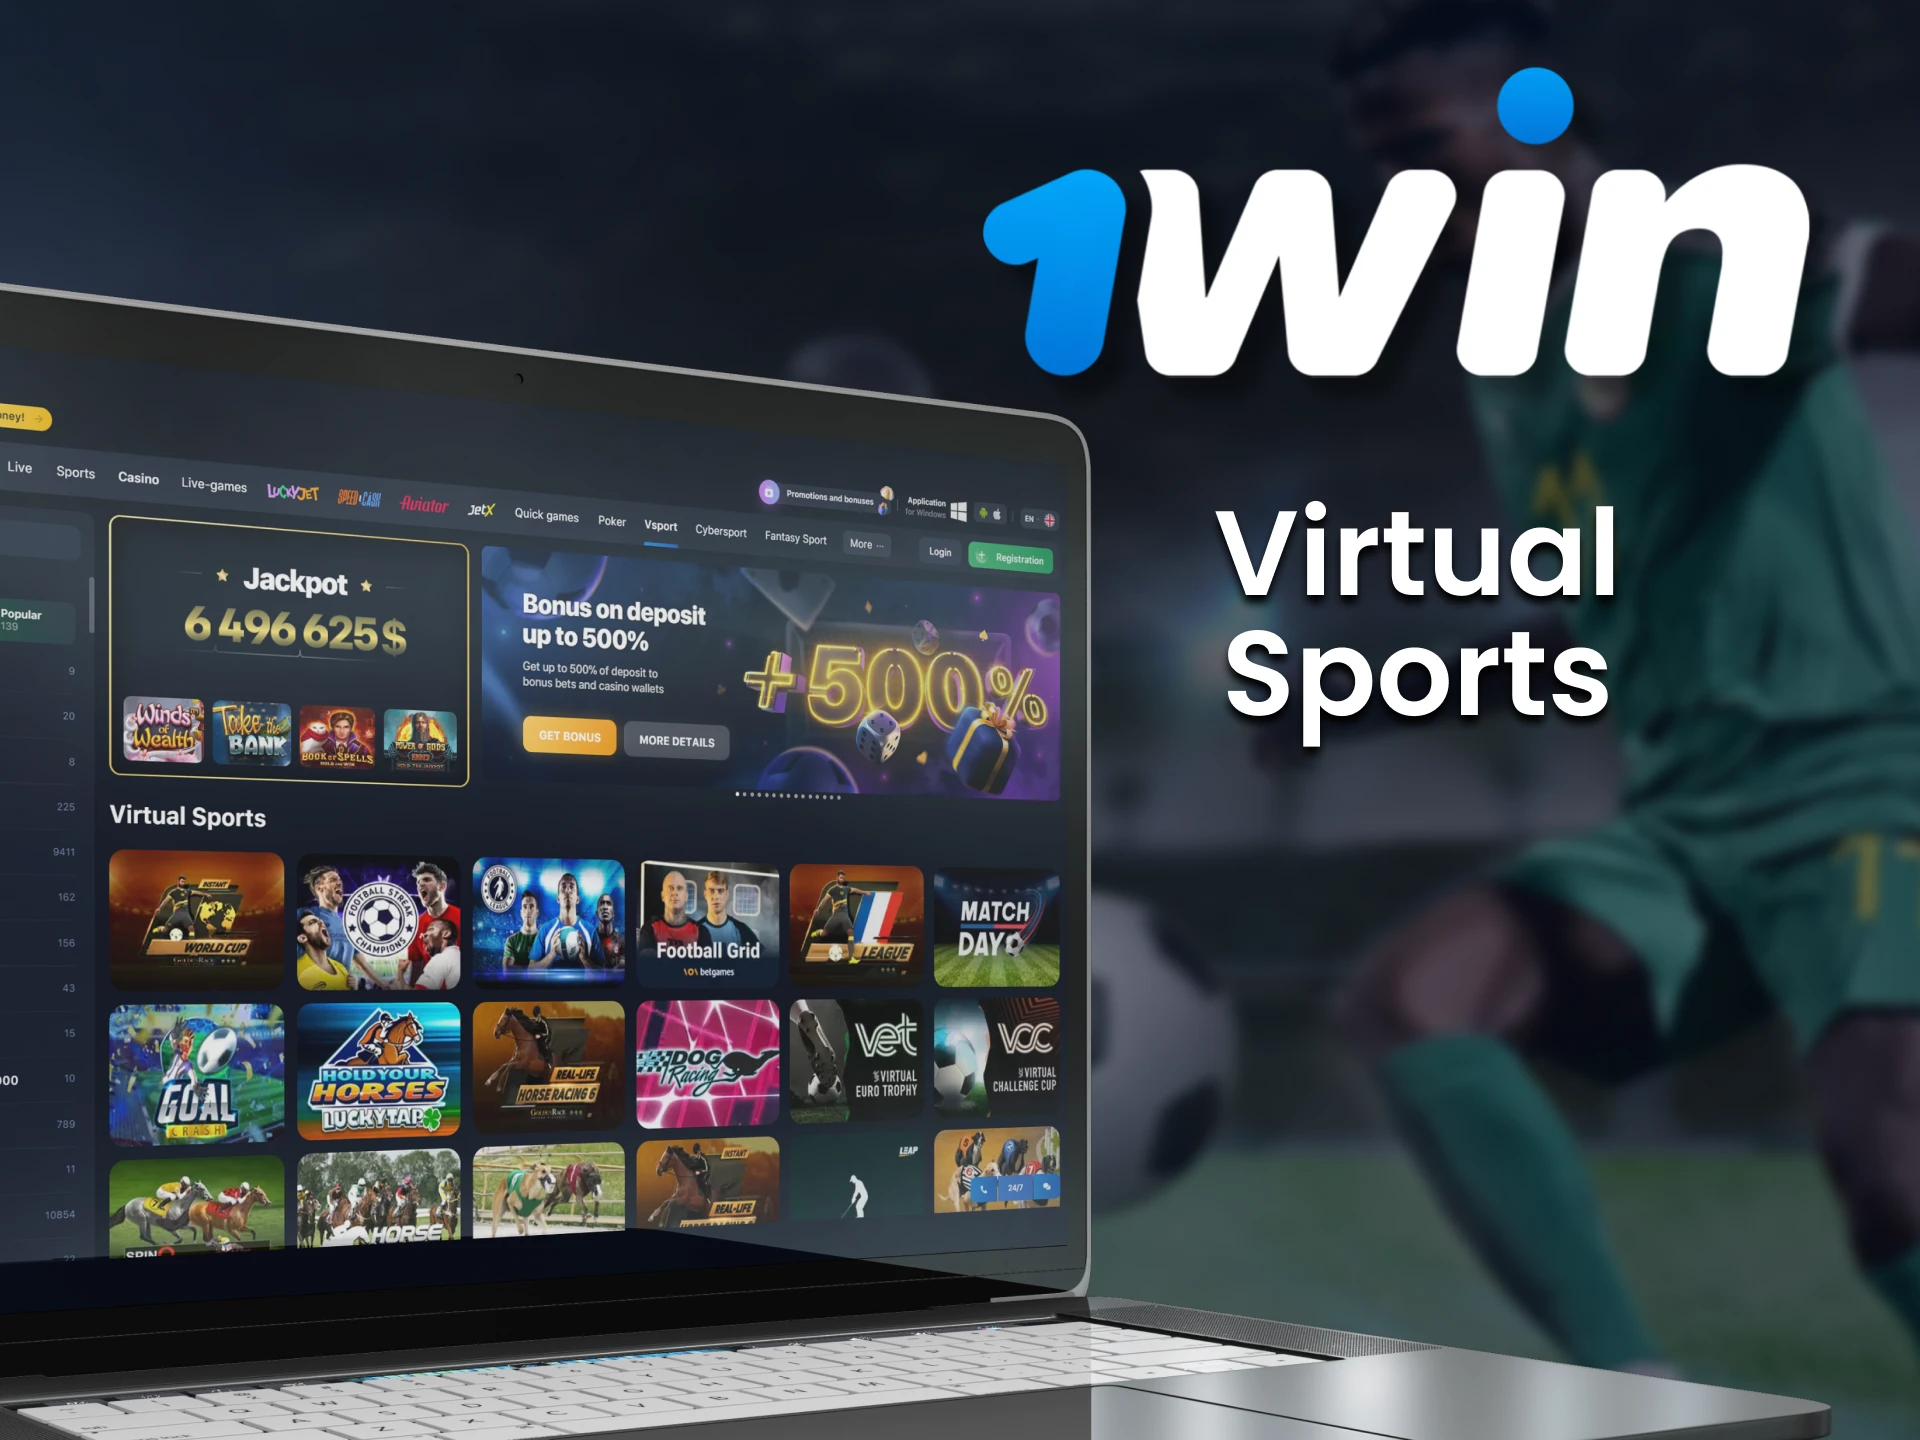 Bet on virtual sports events with 1win.